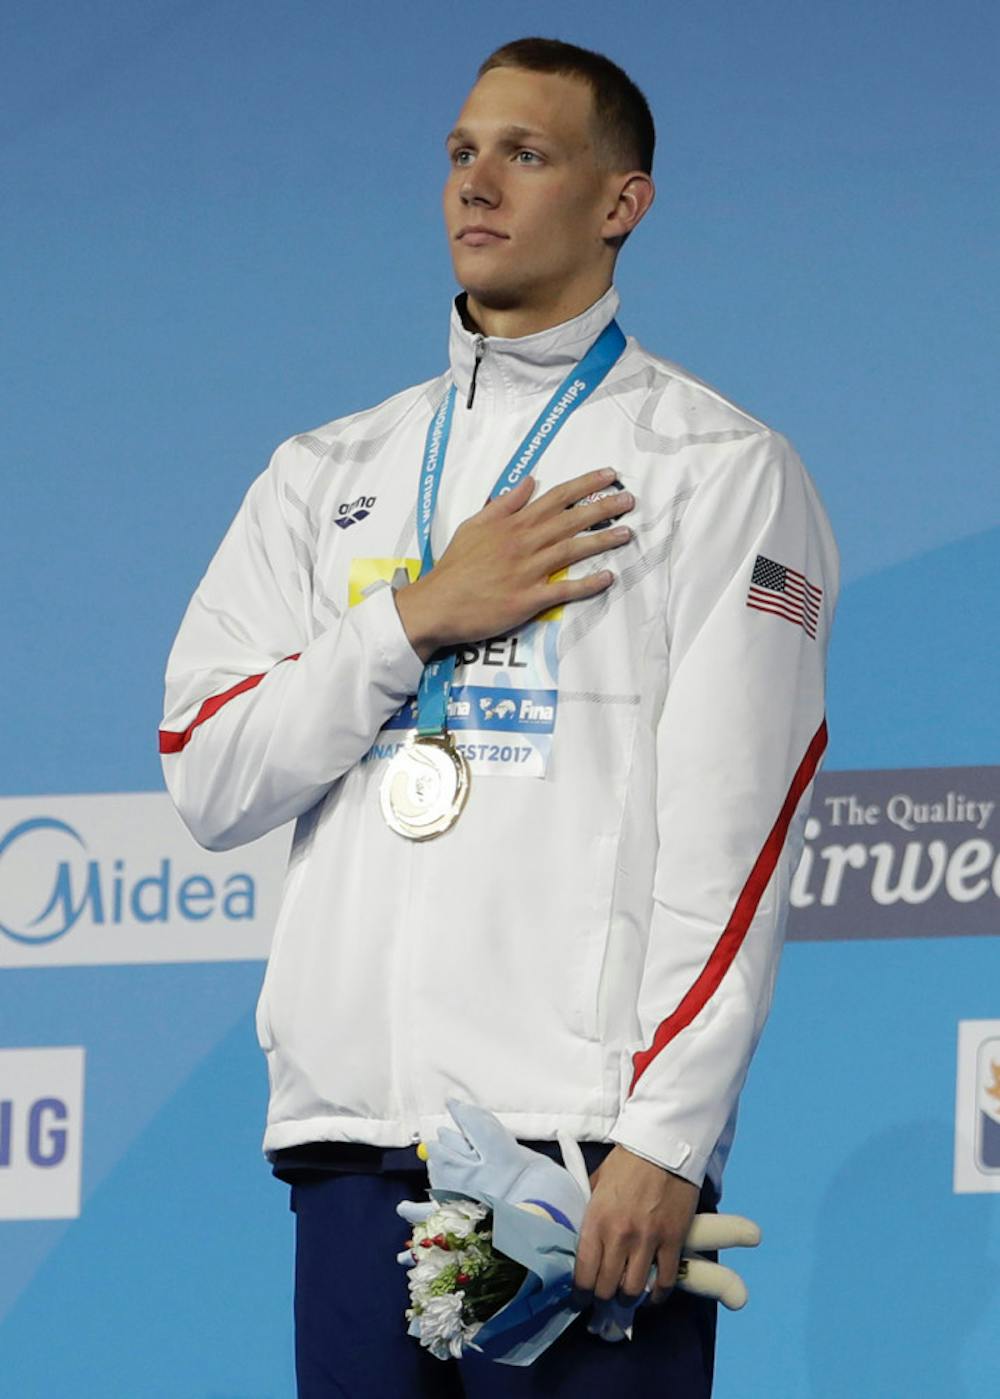 <blockquote><div dir="ltr">ASSOCIATED PRESS United States’ Caeleb Remel Dressel listens to the national anthem after winning the gold medal in the men’s 100-meter butterfly final during the swimming competitions of the World Aquatics Championships in Budapest, Hungary, <span class="aBn" data-term="goog_930372568"><span class="aQJ">on Saturday</span></span>.</div></blockquote>